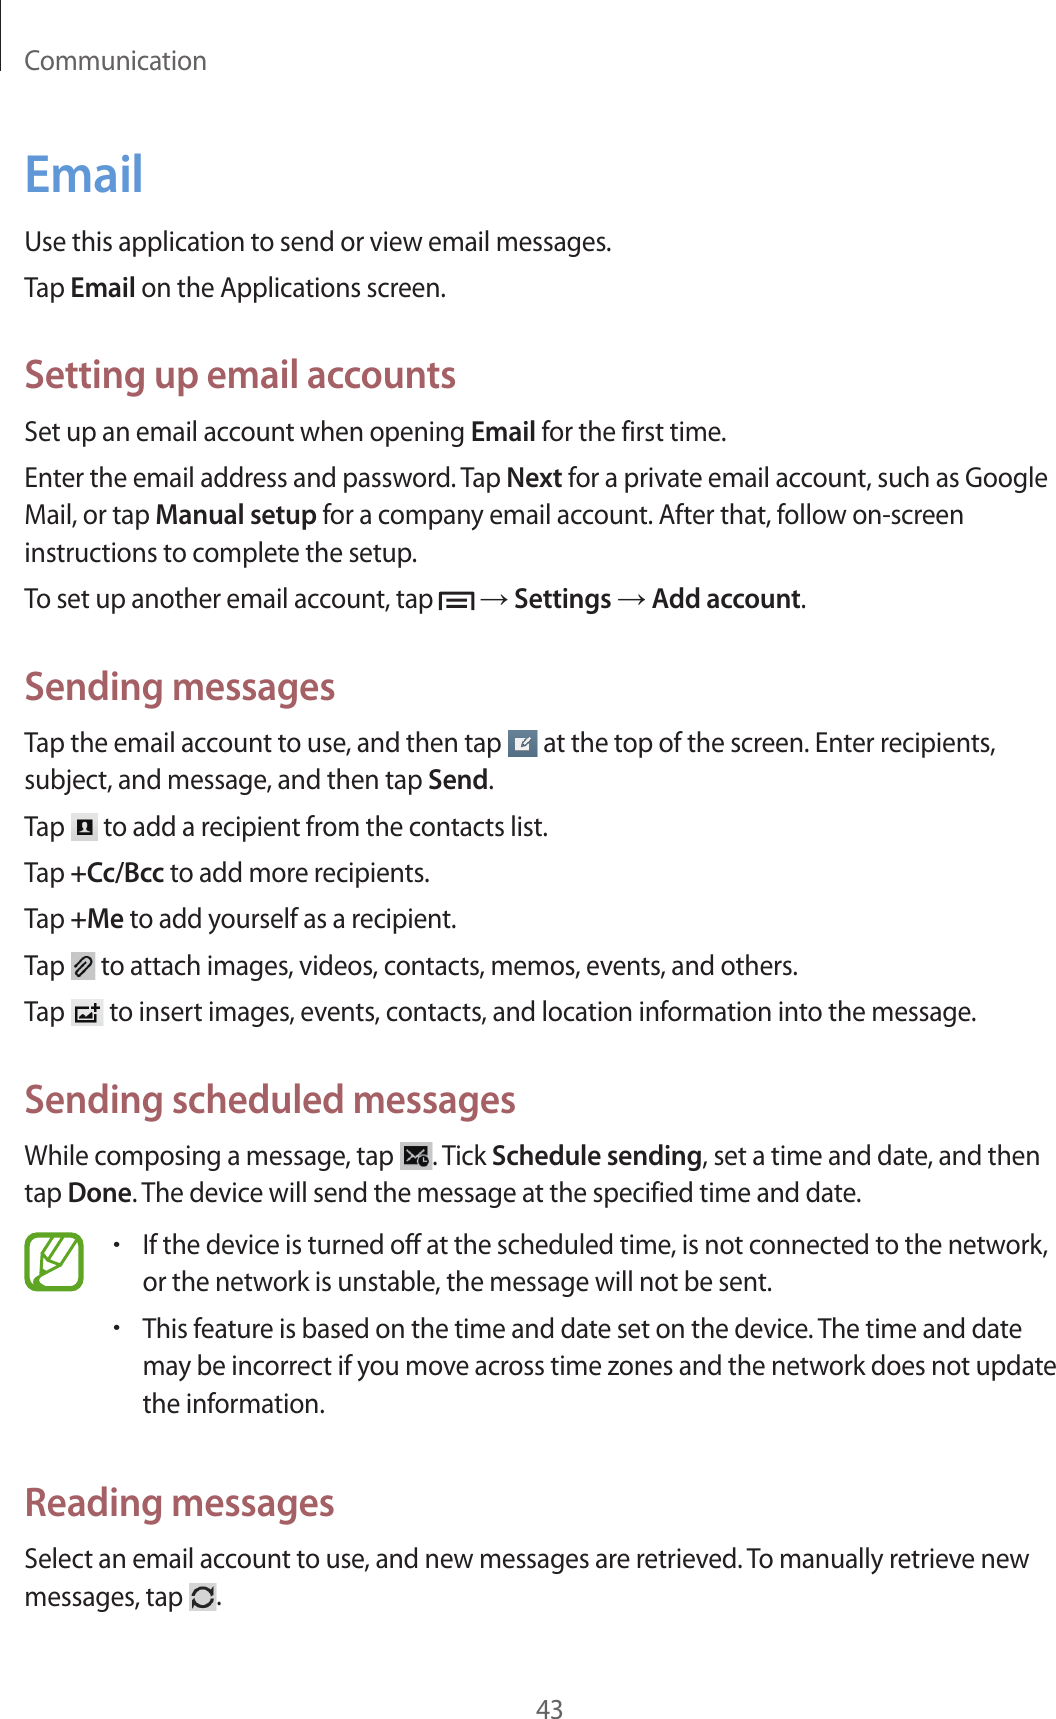 Communication43EmailUse this application to send or view email messages.Tap Email on the Applications screen.Setting up email accountsSet up an email account when opening Email for the first time.Enter the email address and password. Tap Next for a private email account, such as Google Mail, or tap Manual setup for a company email account. After that, follow on-screen instructions to complete the setup.To set up another email account, tap   → Settings → Add account.Sending messagesTap the email account to use, and then tap   at the top of the screen. Enter recipients, subject, and message, and then tap Send.Tap   to add a recipient from the contacts list.Tap +Cc/Bcc to add more recipients.Tap +Me to add yourself as a recipient.Tap   to attach images, videos, contacts, memos, events, and others.Tap   to insert images, events, contacts, and location information into the message.Sending scheduled messagesWhile composing a message, tap  . Tick Schedule sending, set a time and date, and then tap Done. The device will send the message at the specified time and date.• If the device is turned off at the scheduled time, is not connected to the network, or the network is unstable, the message will not be sent.• This feature is based on the time and date set on the device. The time and date may be incorrect if you move across time zones and the network does not update the information.Reading messagesSelect an email account to use, and new messages are retrieved. To manually retrieve new messages, tap  .